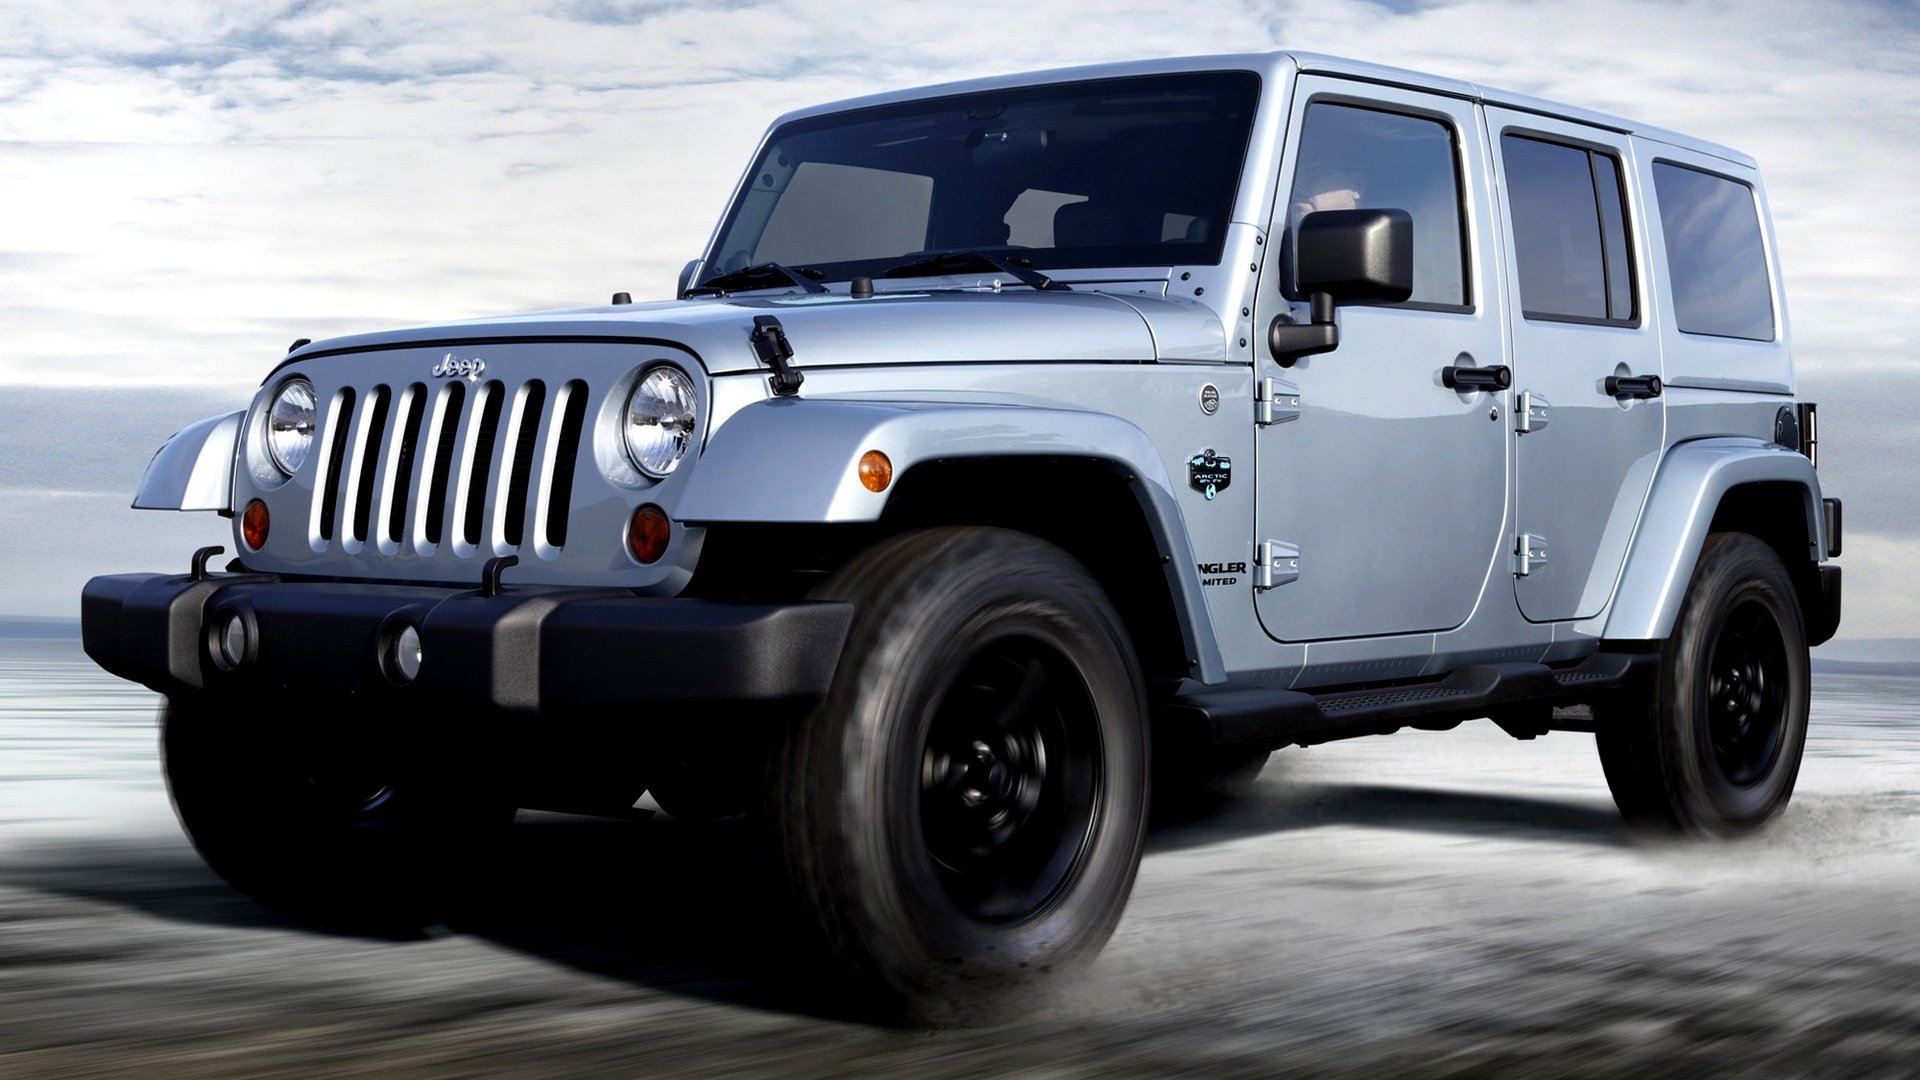 12 Jeep Wrangler Unlimited Arctic Hd Wallpaper Background Image 19x1080